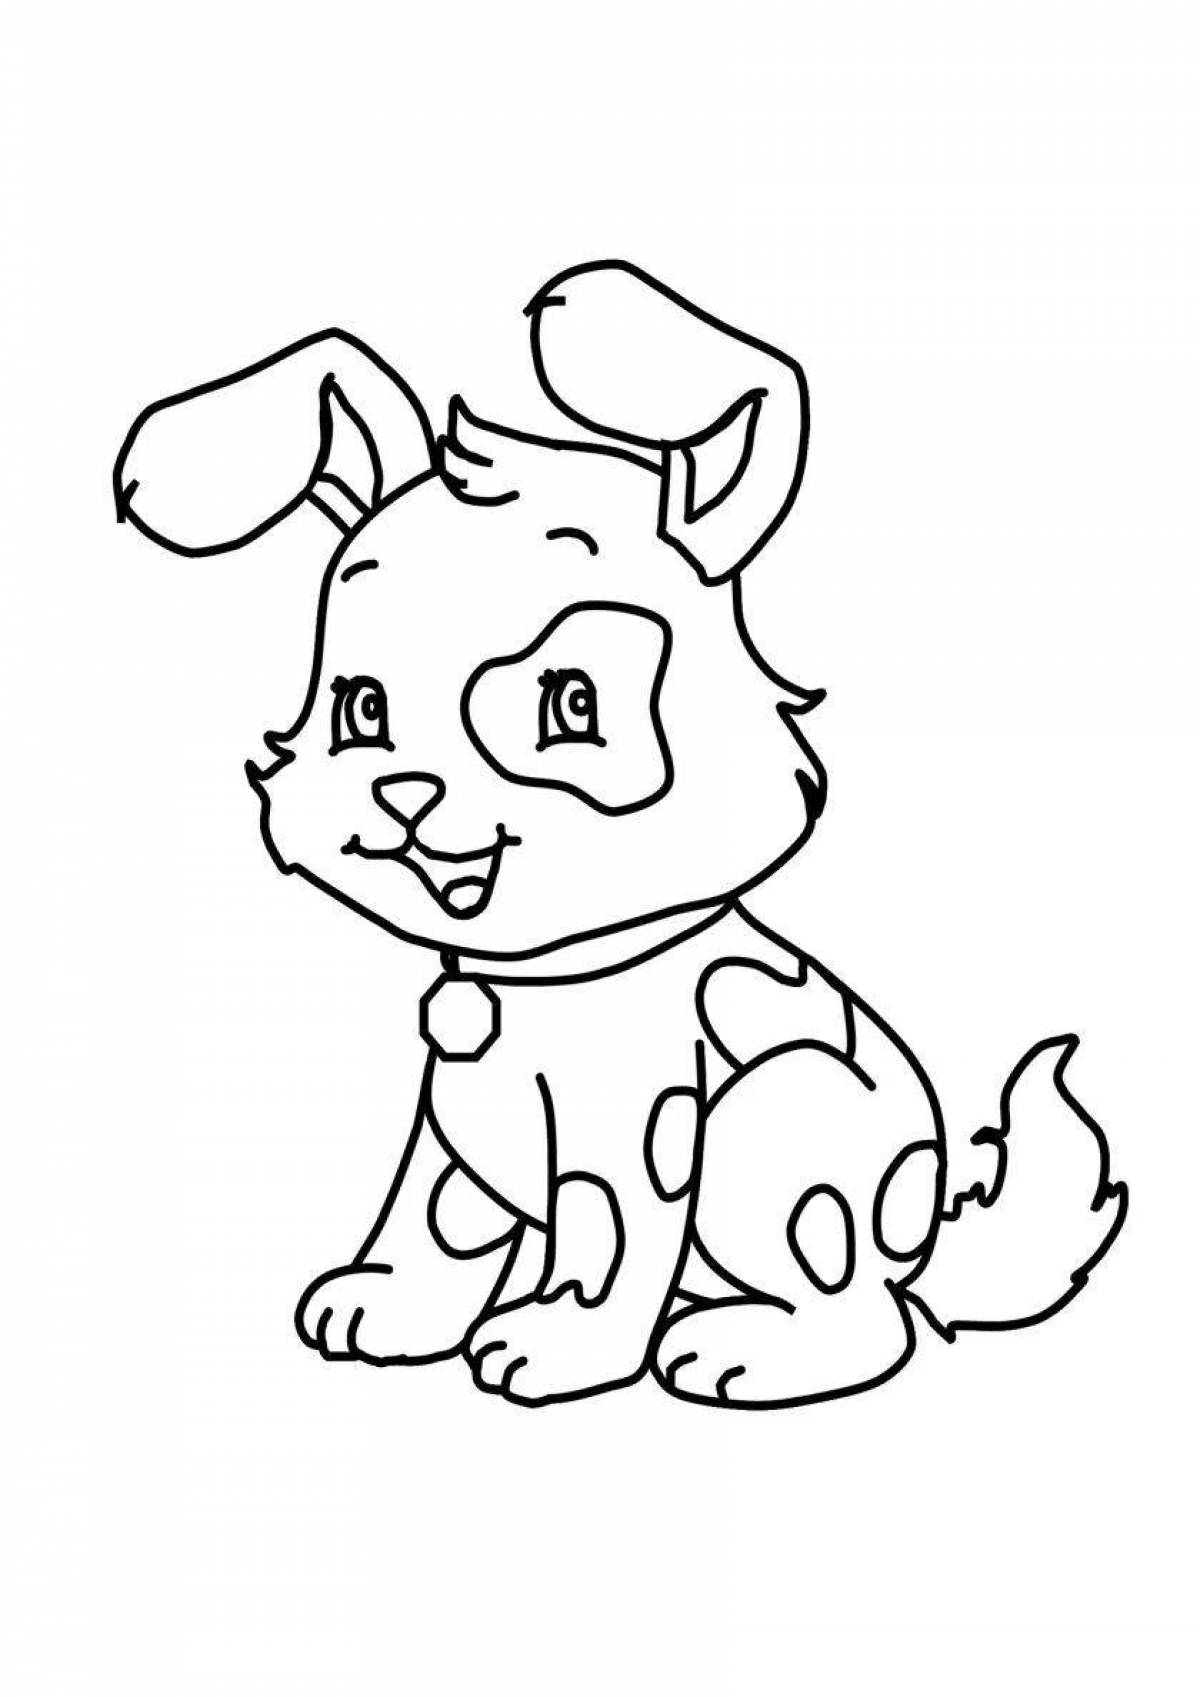 Live coloring dog for children 6-7 years old